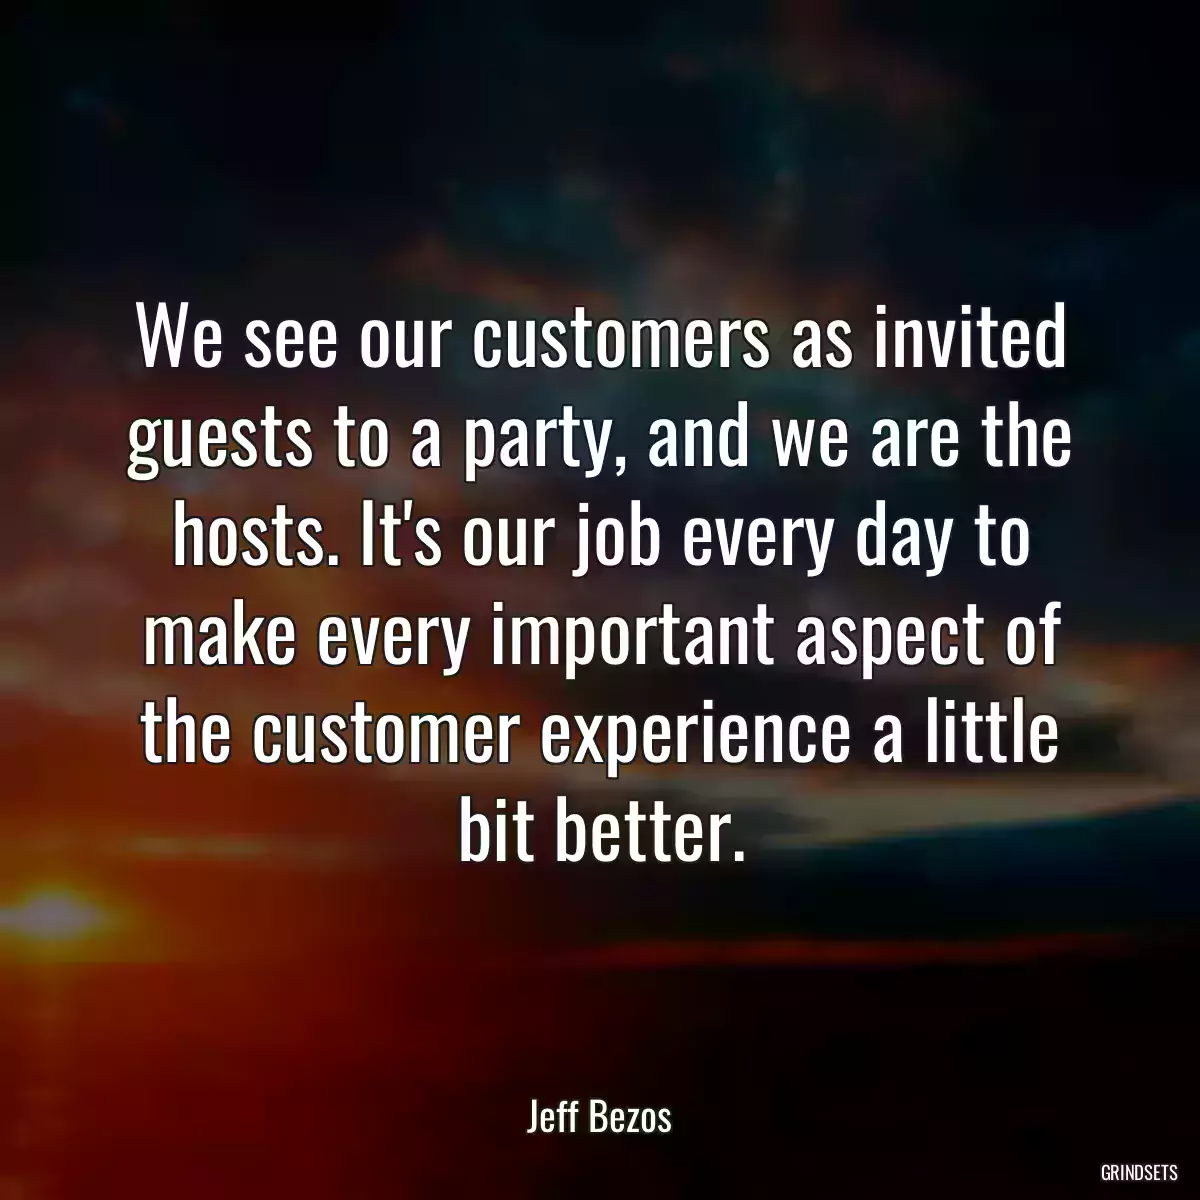 We see our customers as invited guests to a party, and we are the hosts. It\'s our job every day to make every important aspect of the customer experience a little bit better.